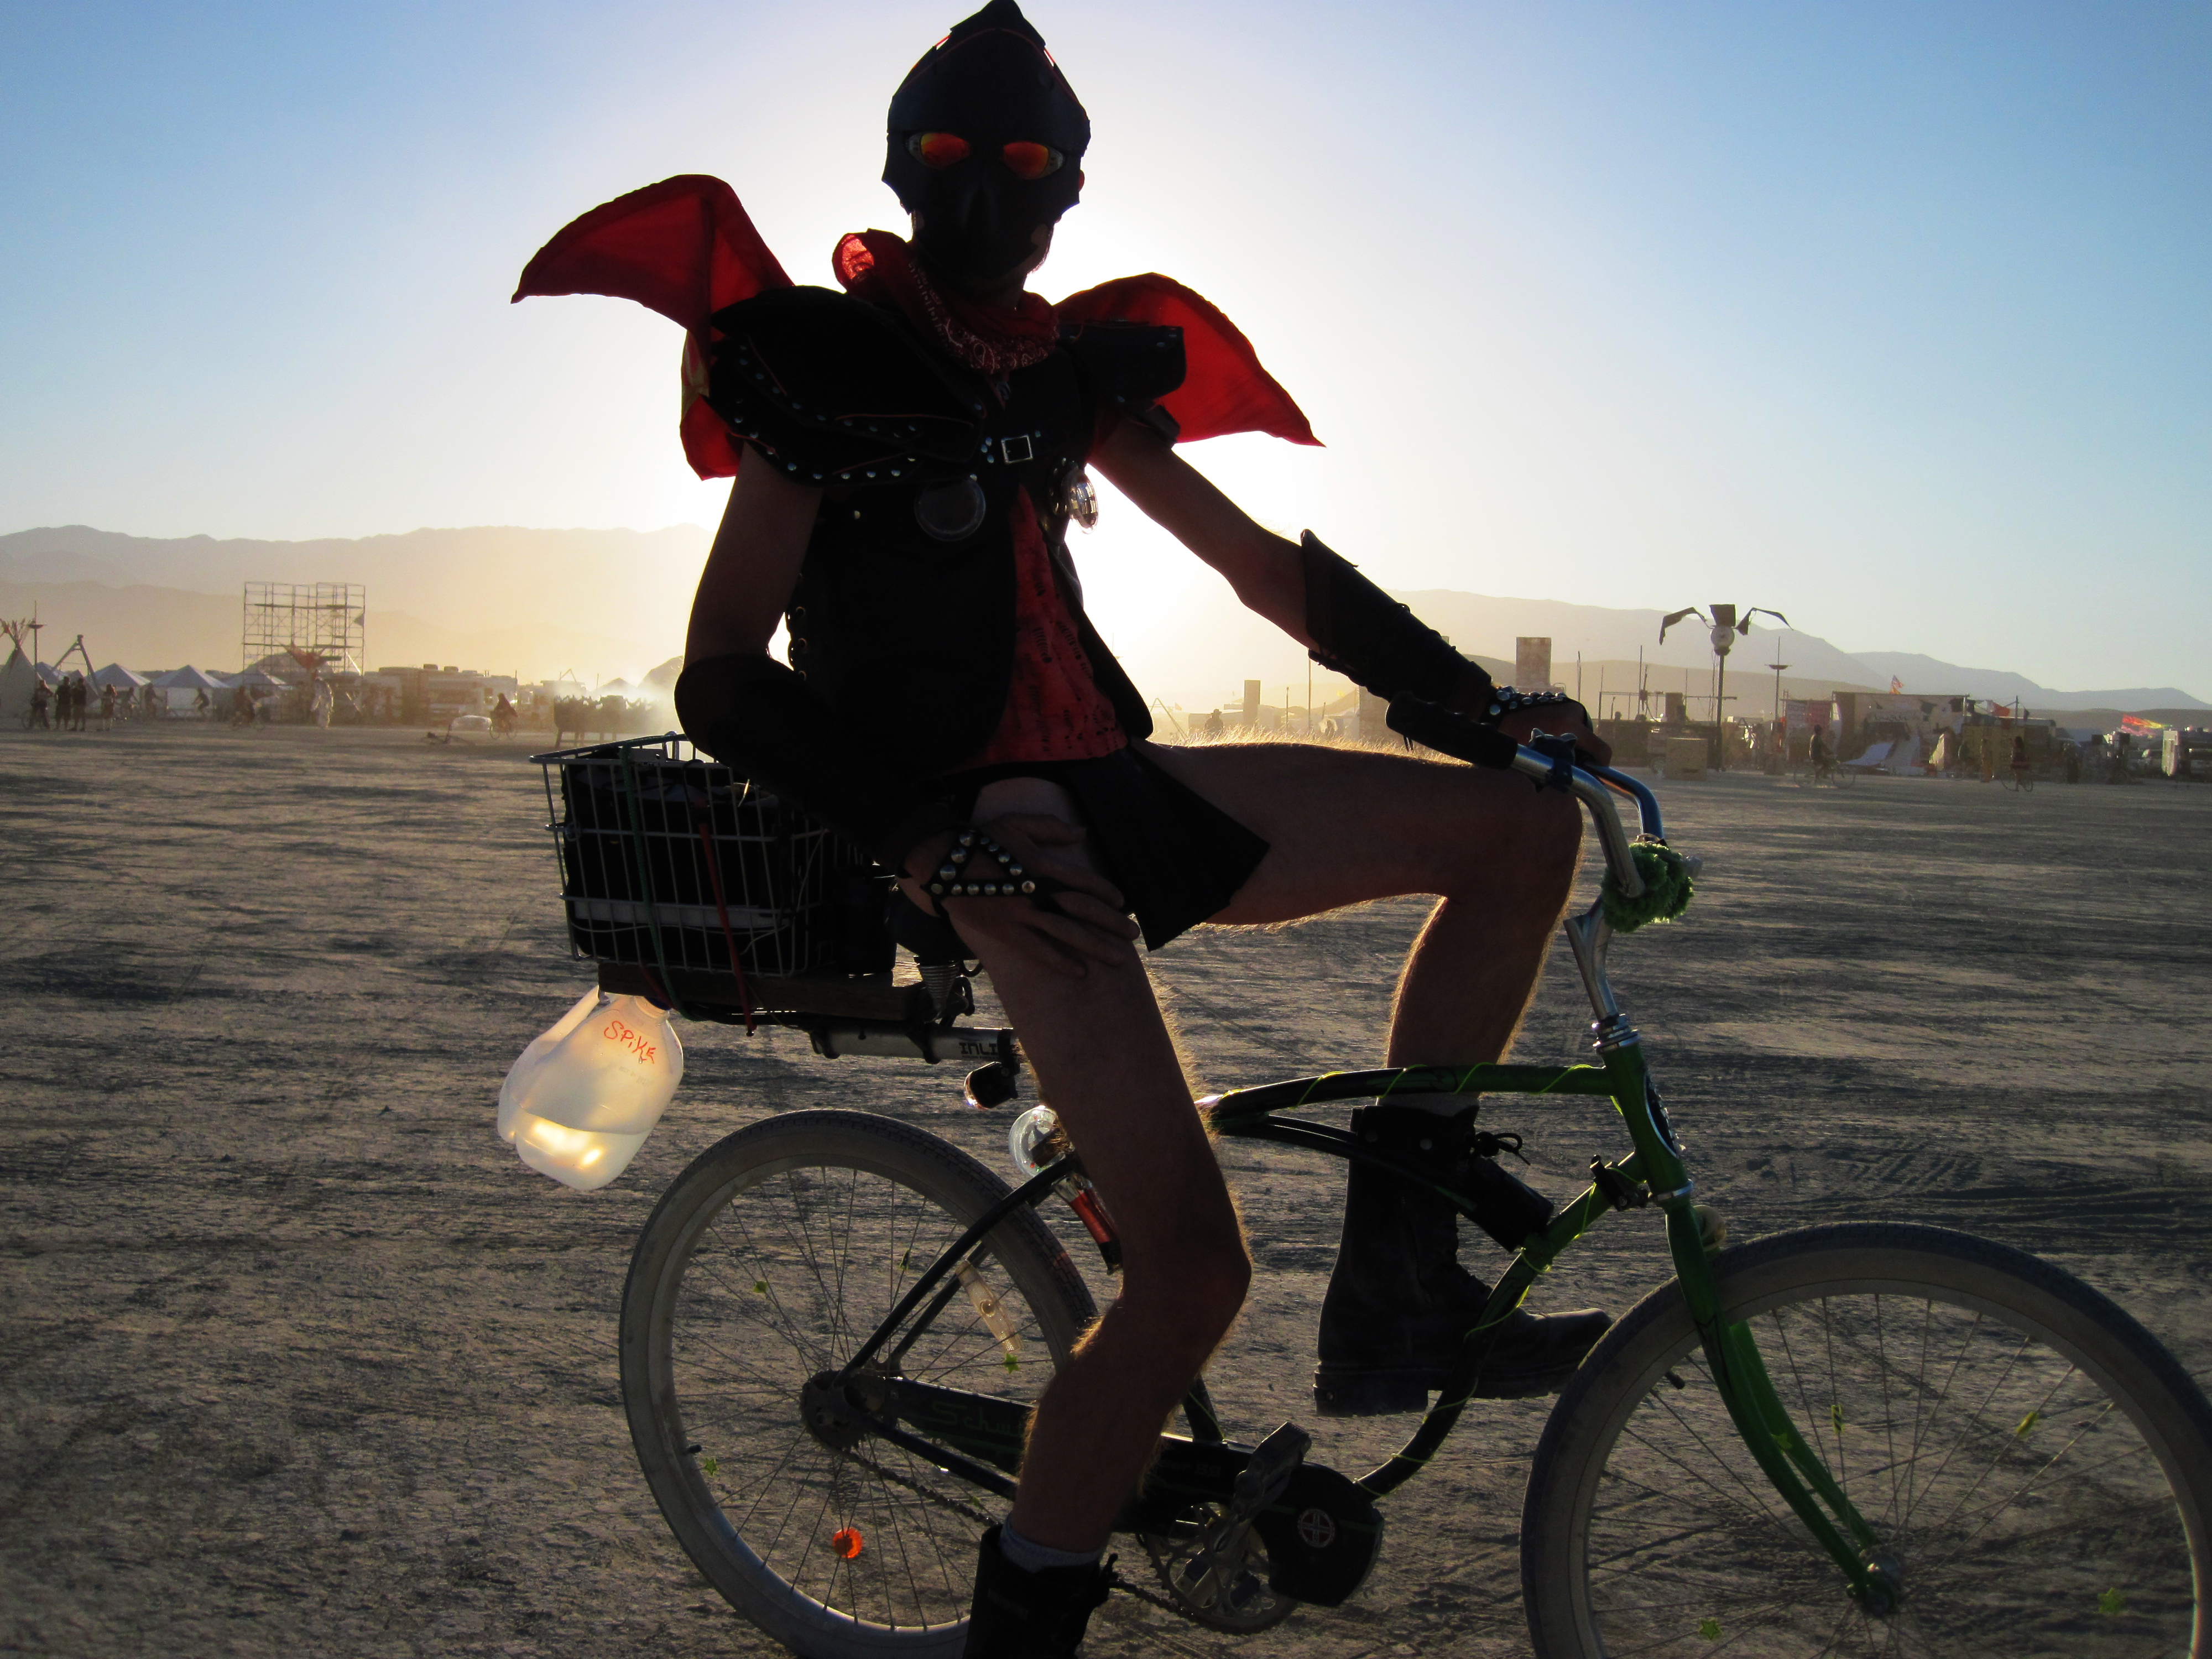 Photographer’s View of Burning Man 12 Years Later